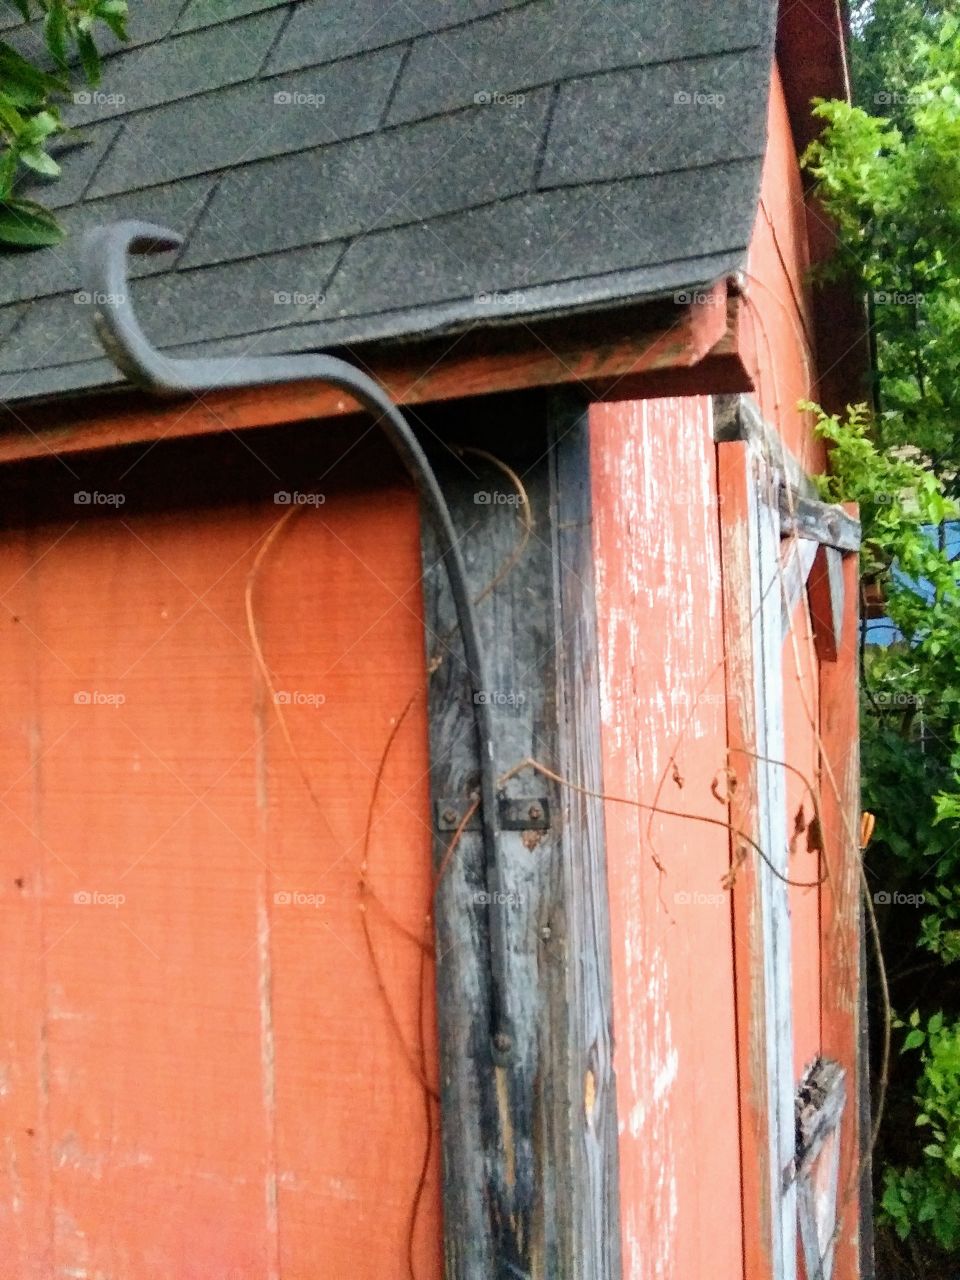 metal hook on a shed